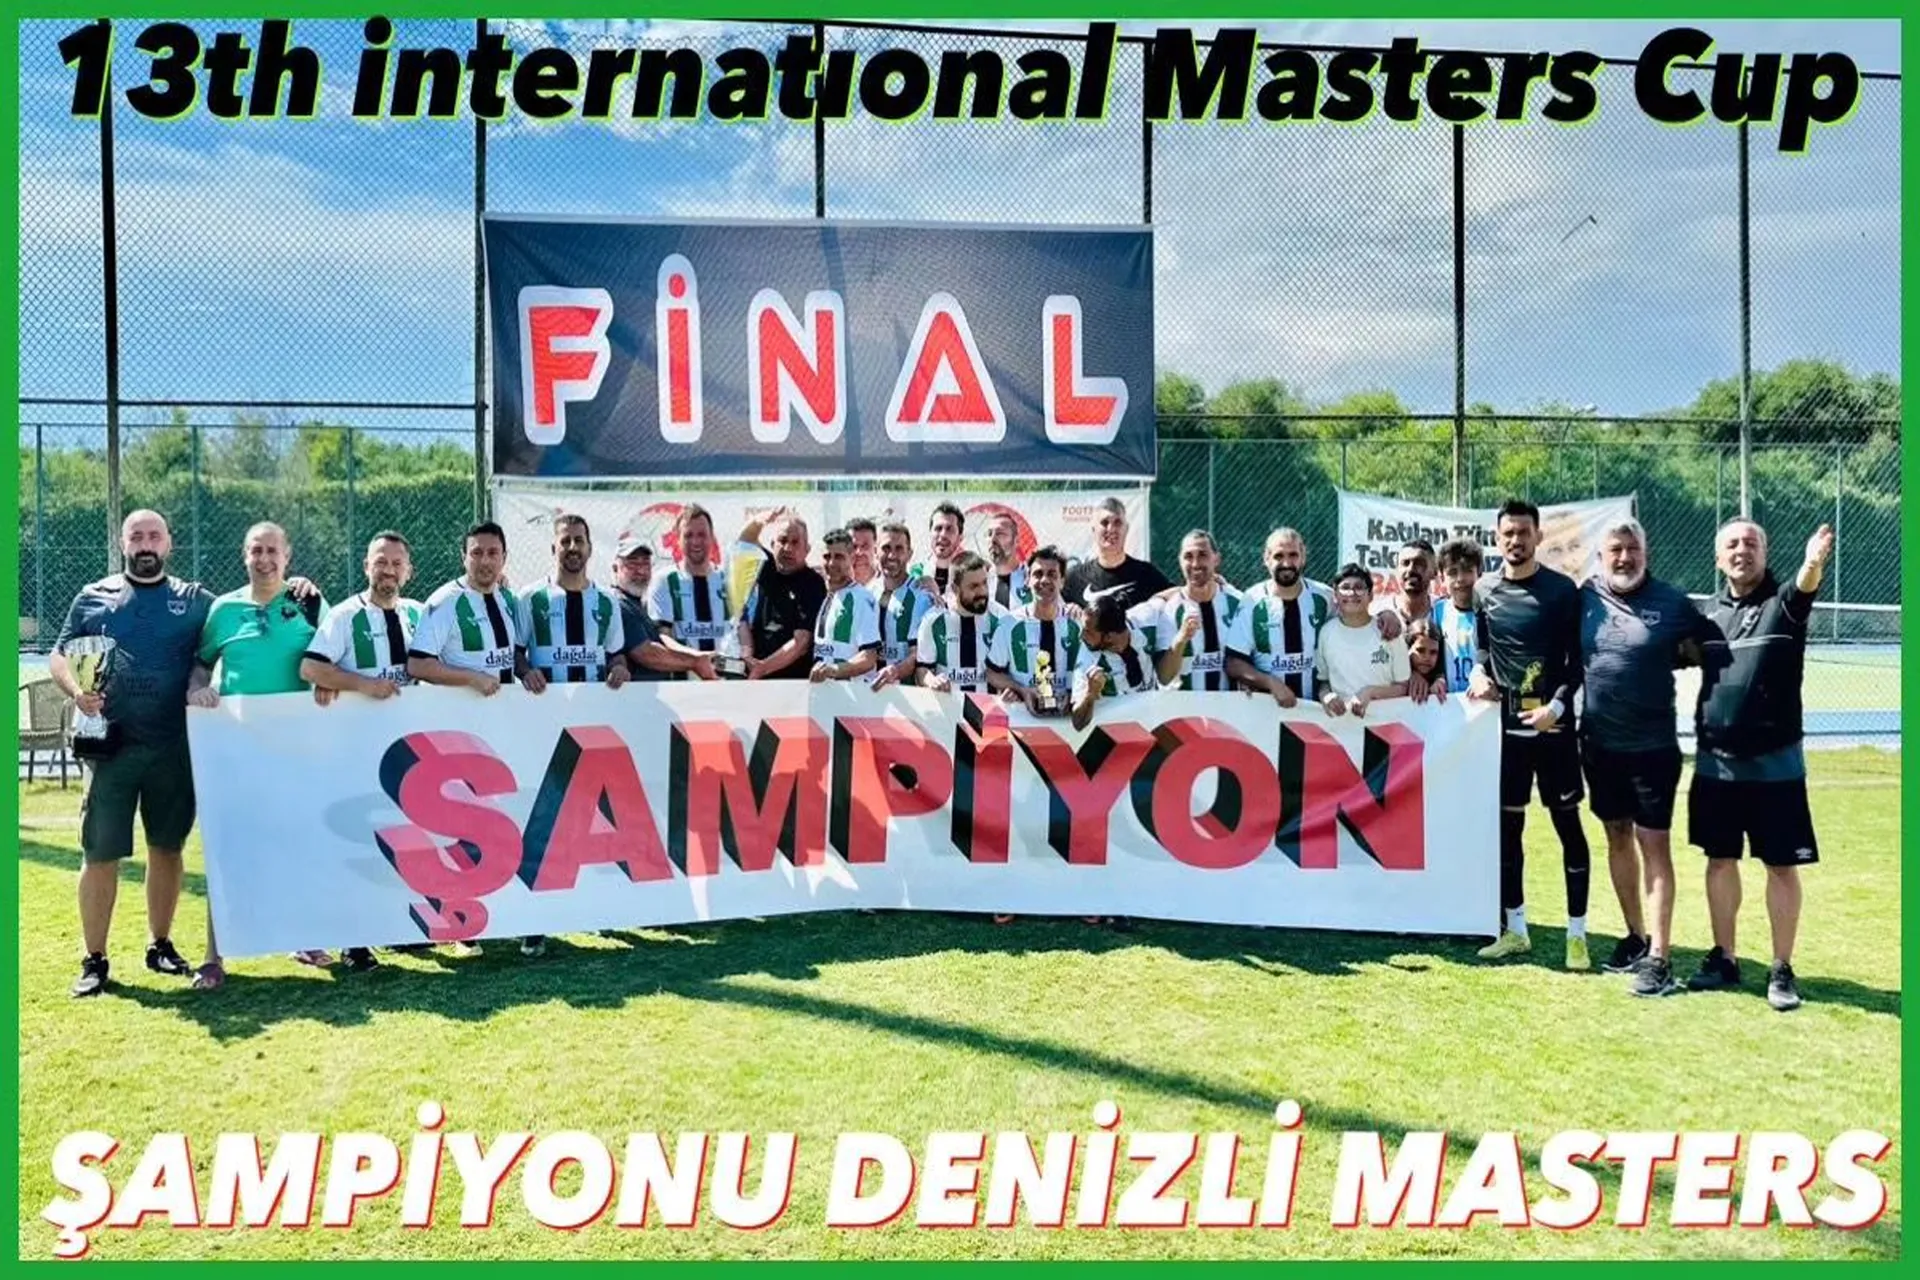 DENİZLİ MASTERS BECAME THE 13TH INTERNATIONAL MASTERS CUP CHAMPIONS